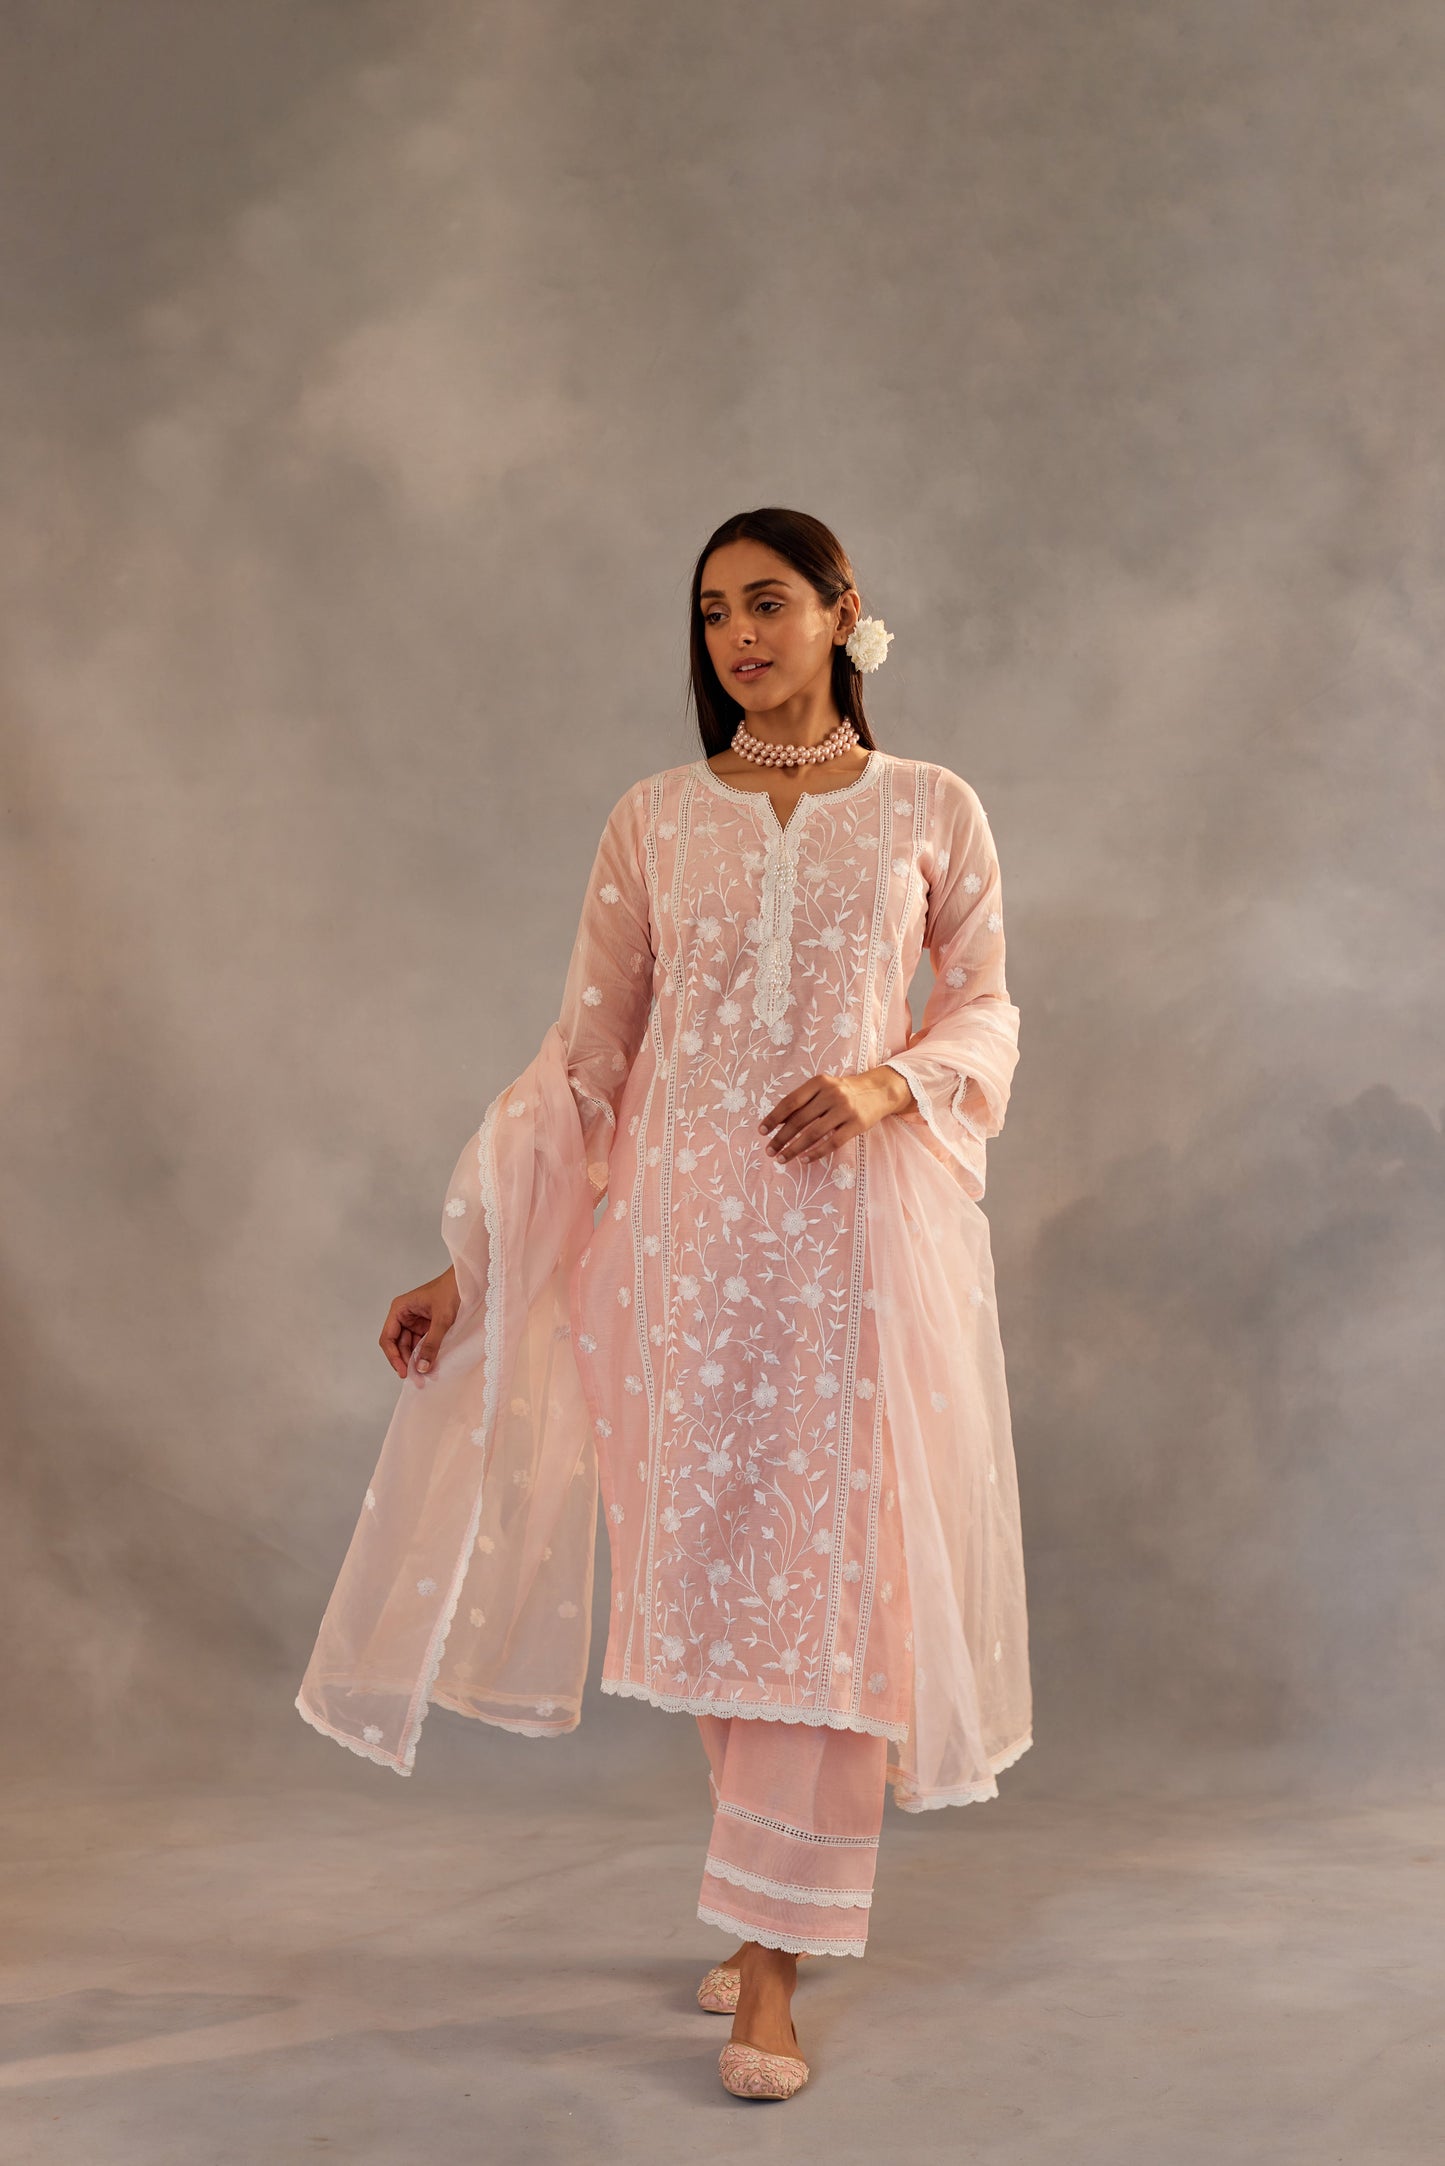 Meher Taluja in Gulbagh - Peach Embroidered Suit Set.